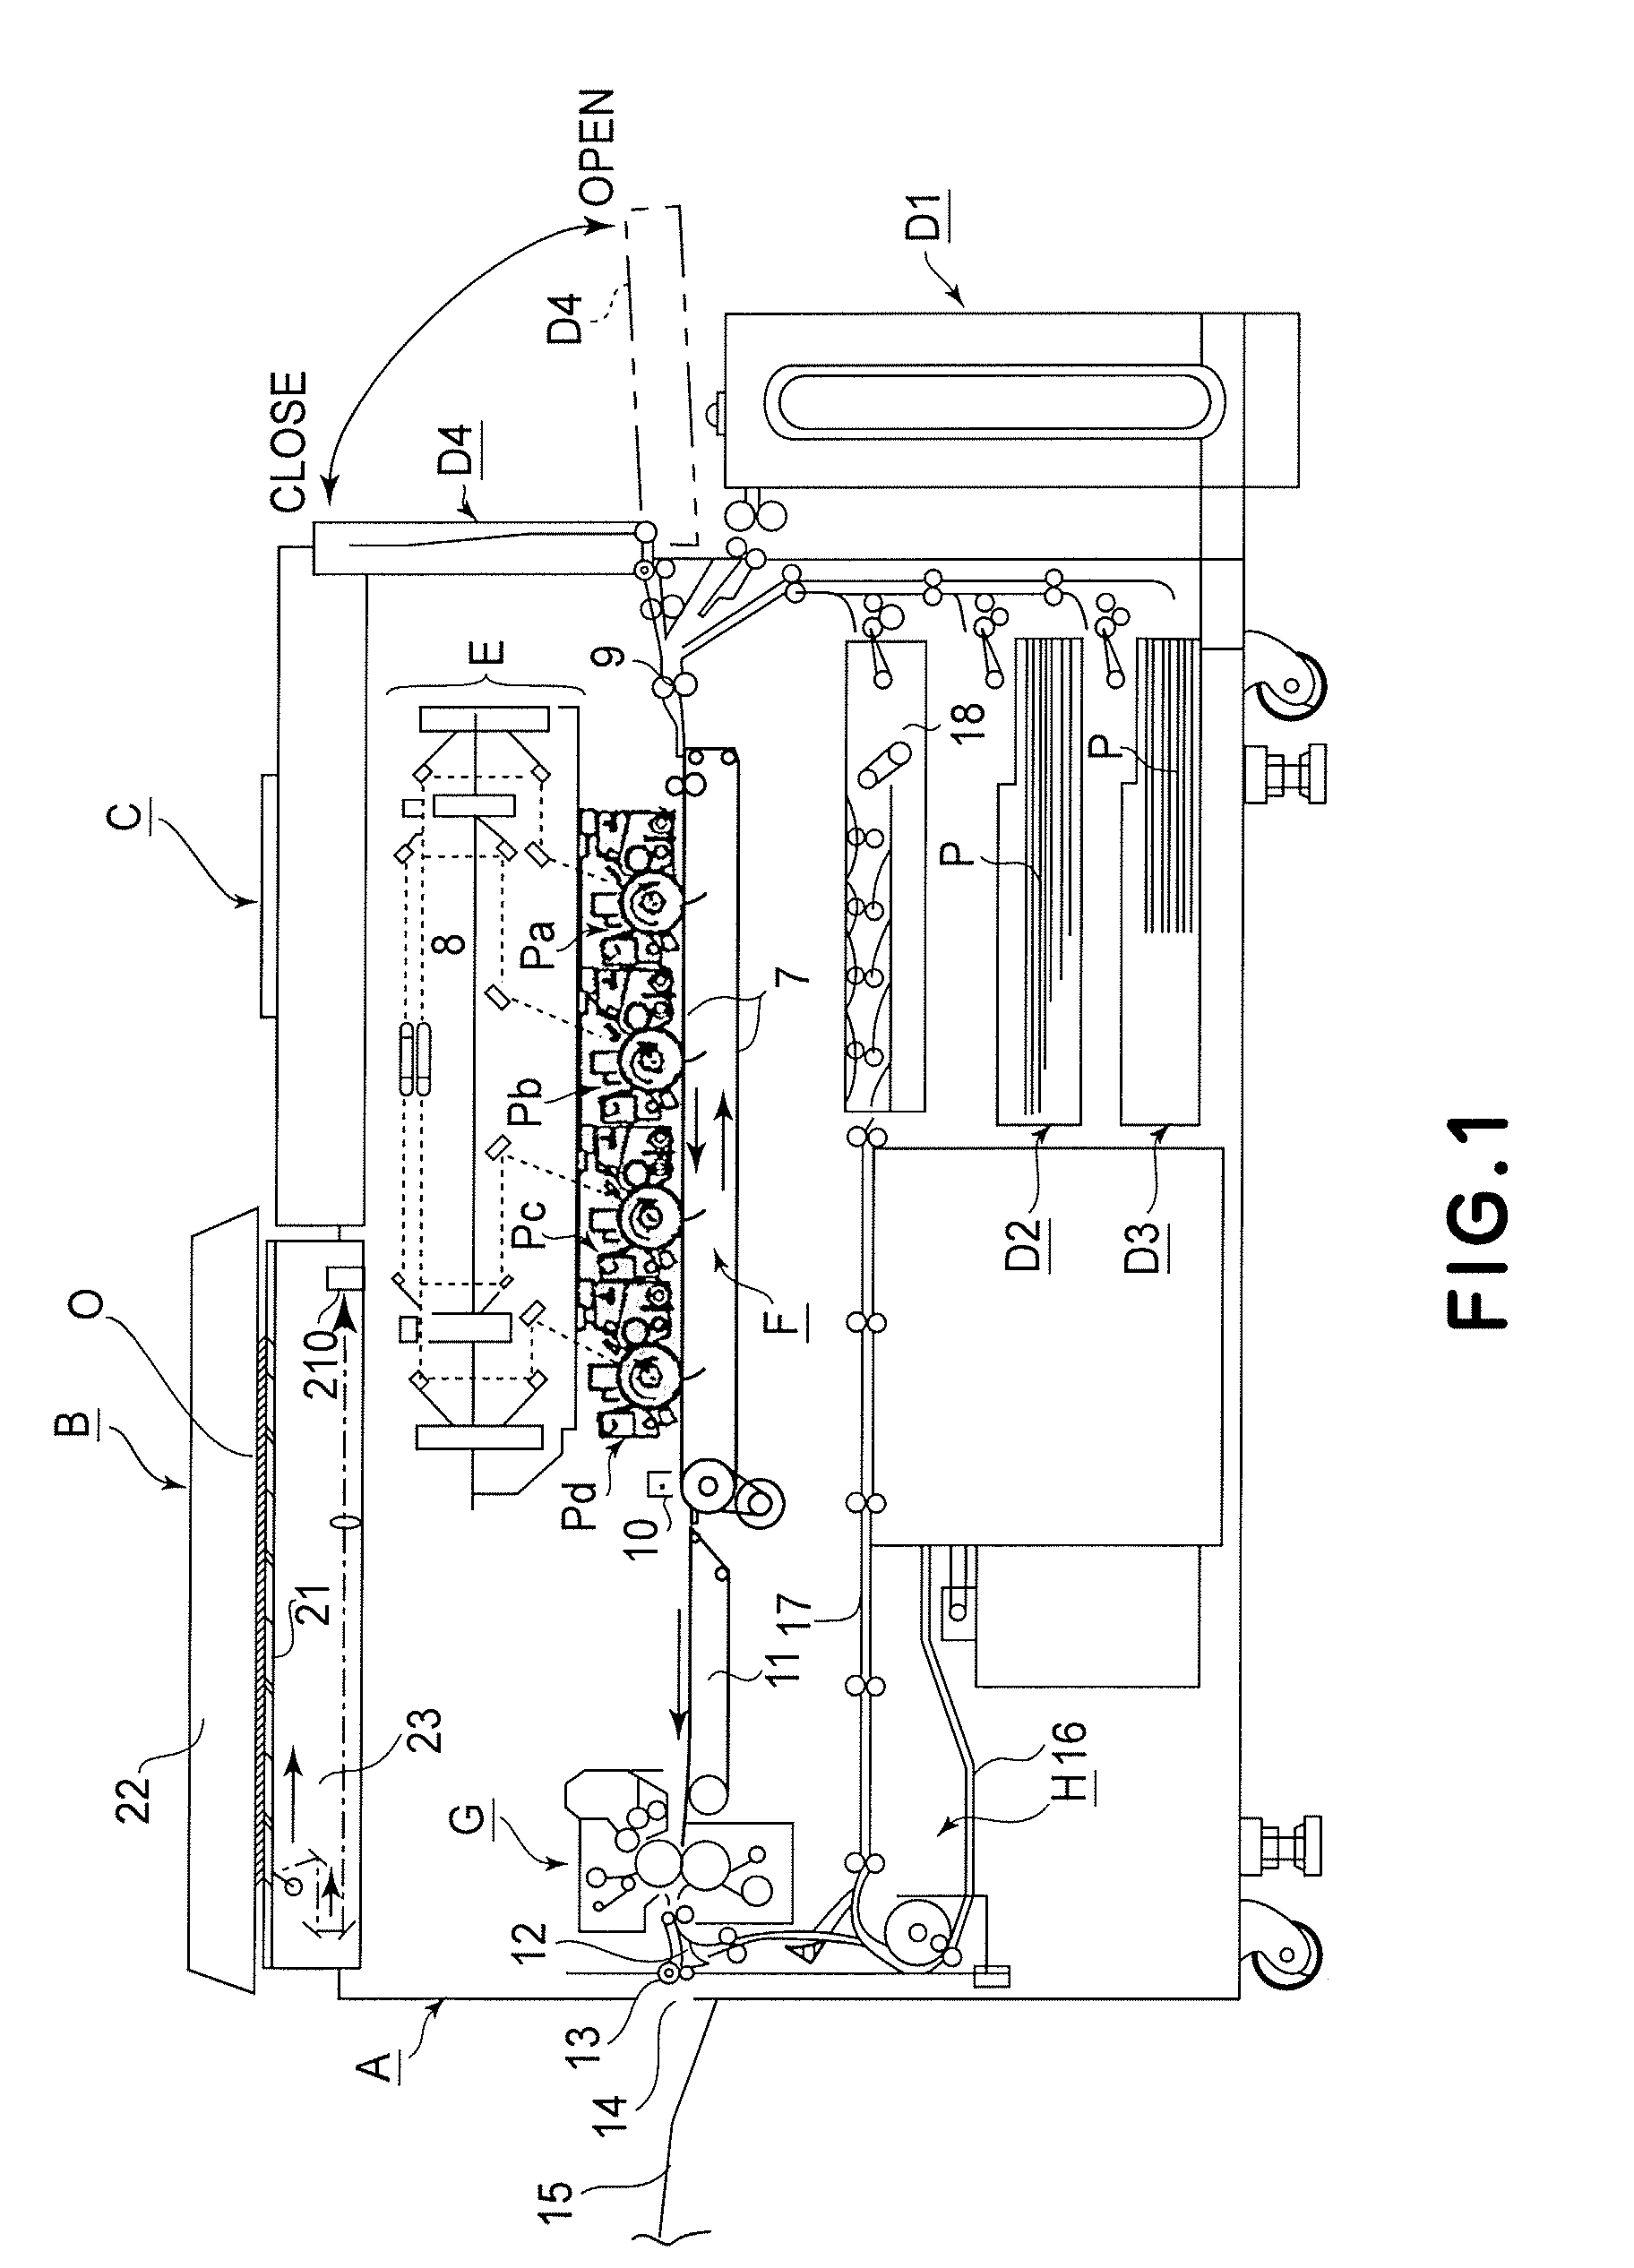 Image forming apparatus and method with control of image heating condition based on desired glossiness difference between achromatic image portion and color image portion